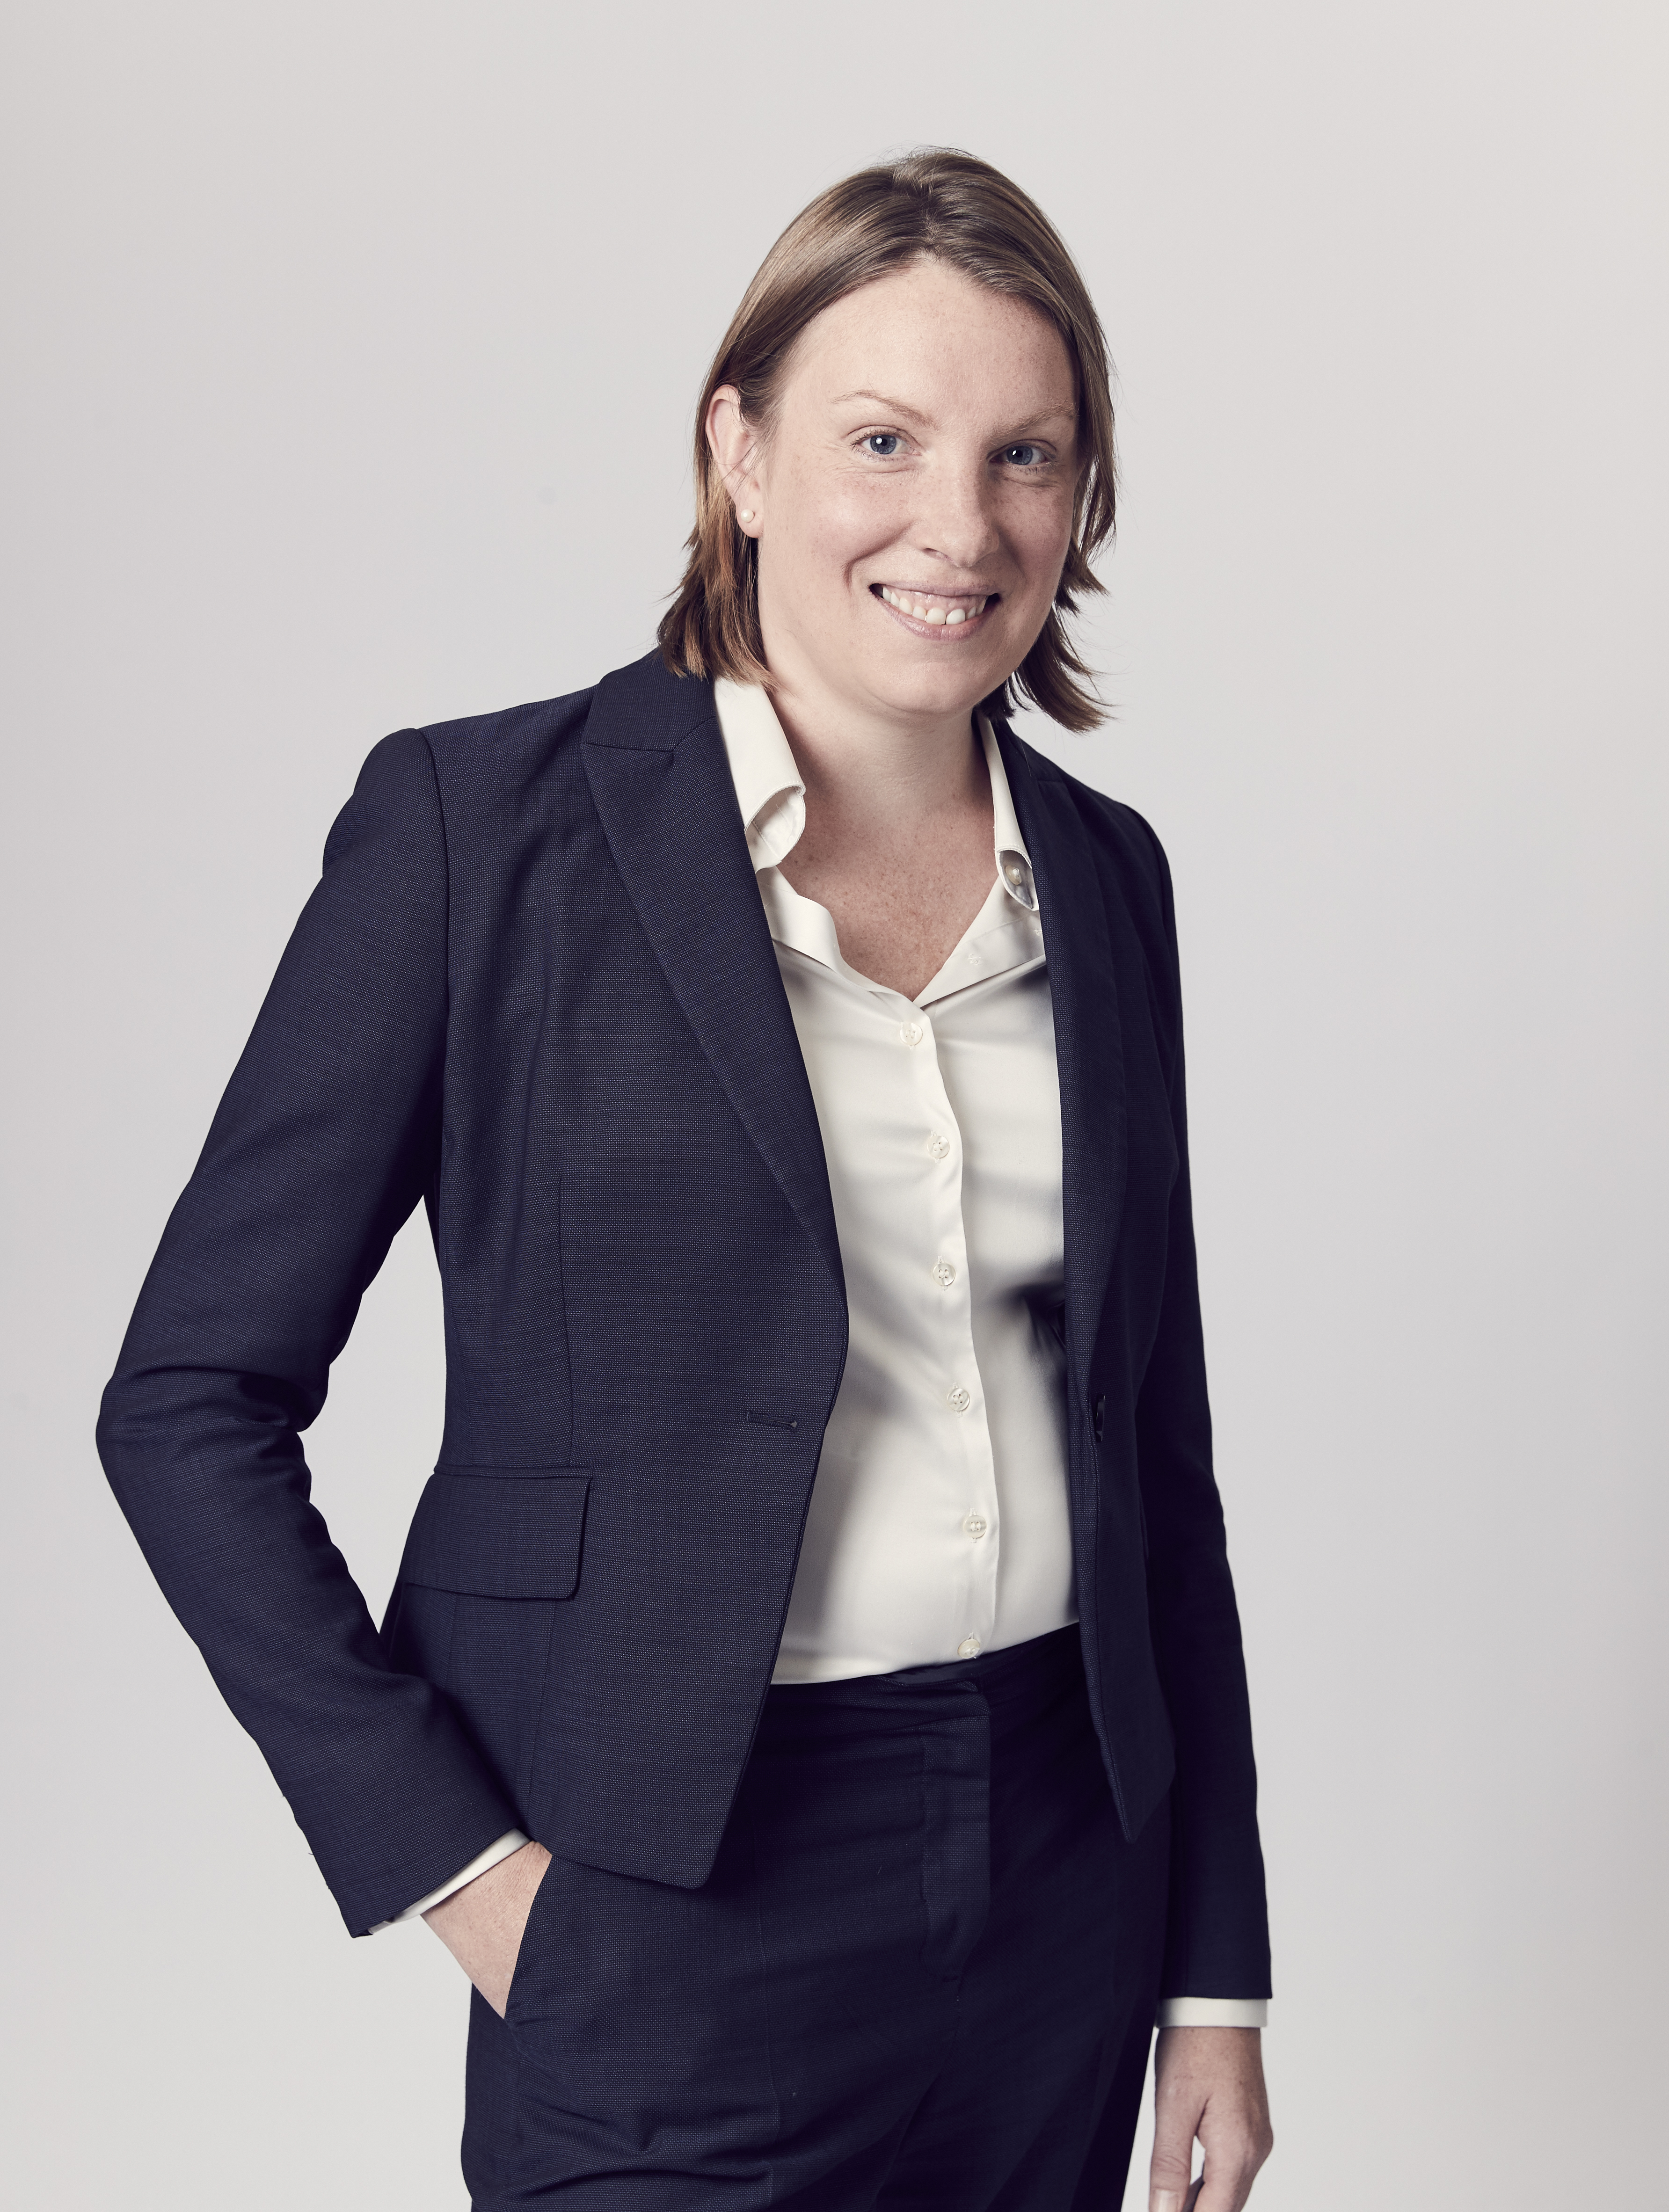 Tracey Crouch, Minister for Sport and Civil Society, was also appointed the ministerial lead for loneliness in January 2018. (Ian Harrison photography)